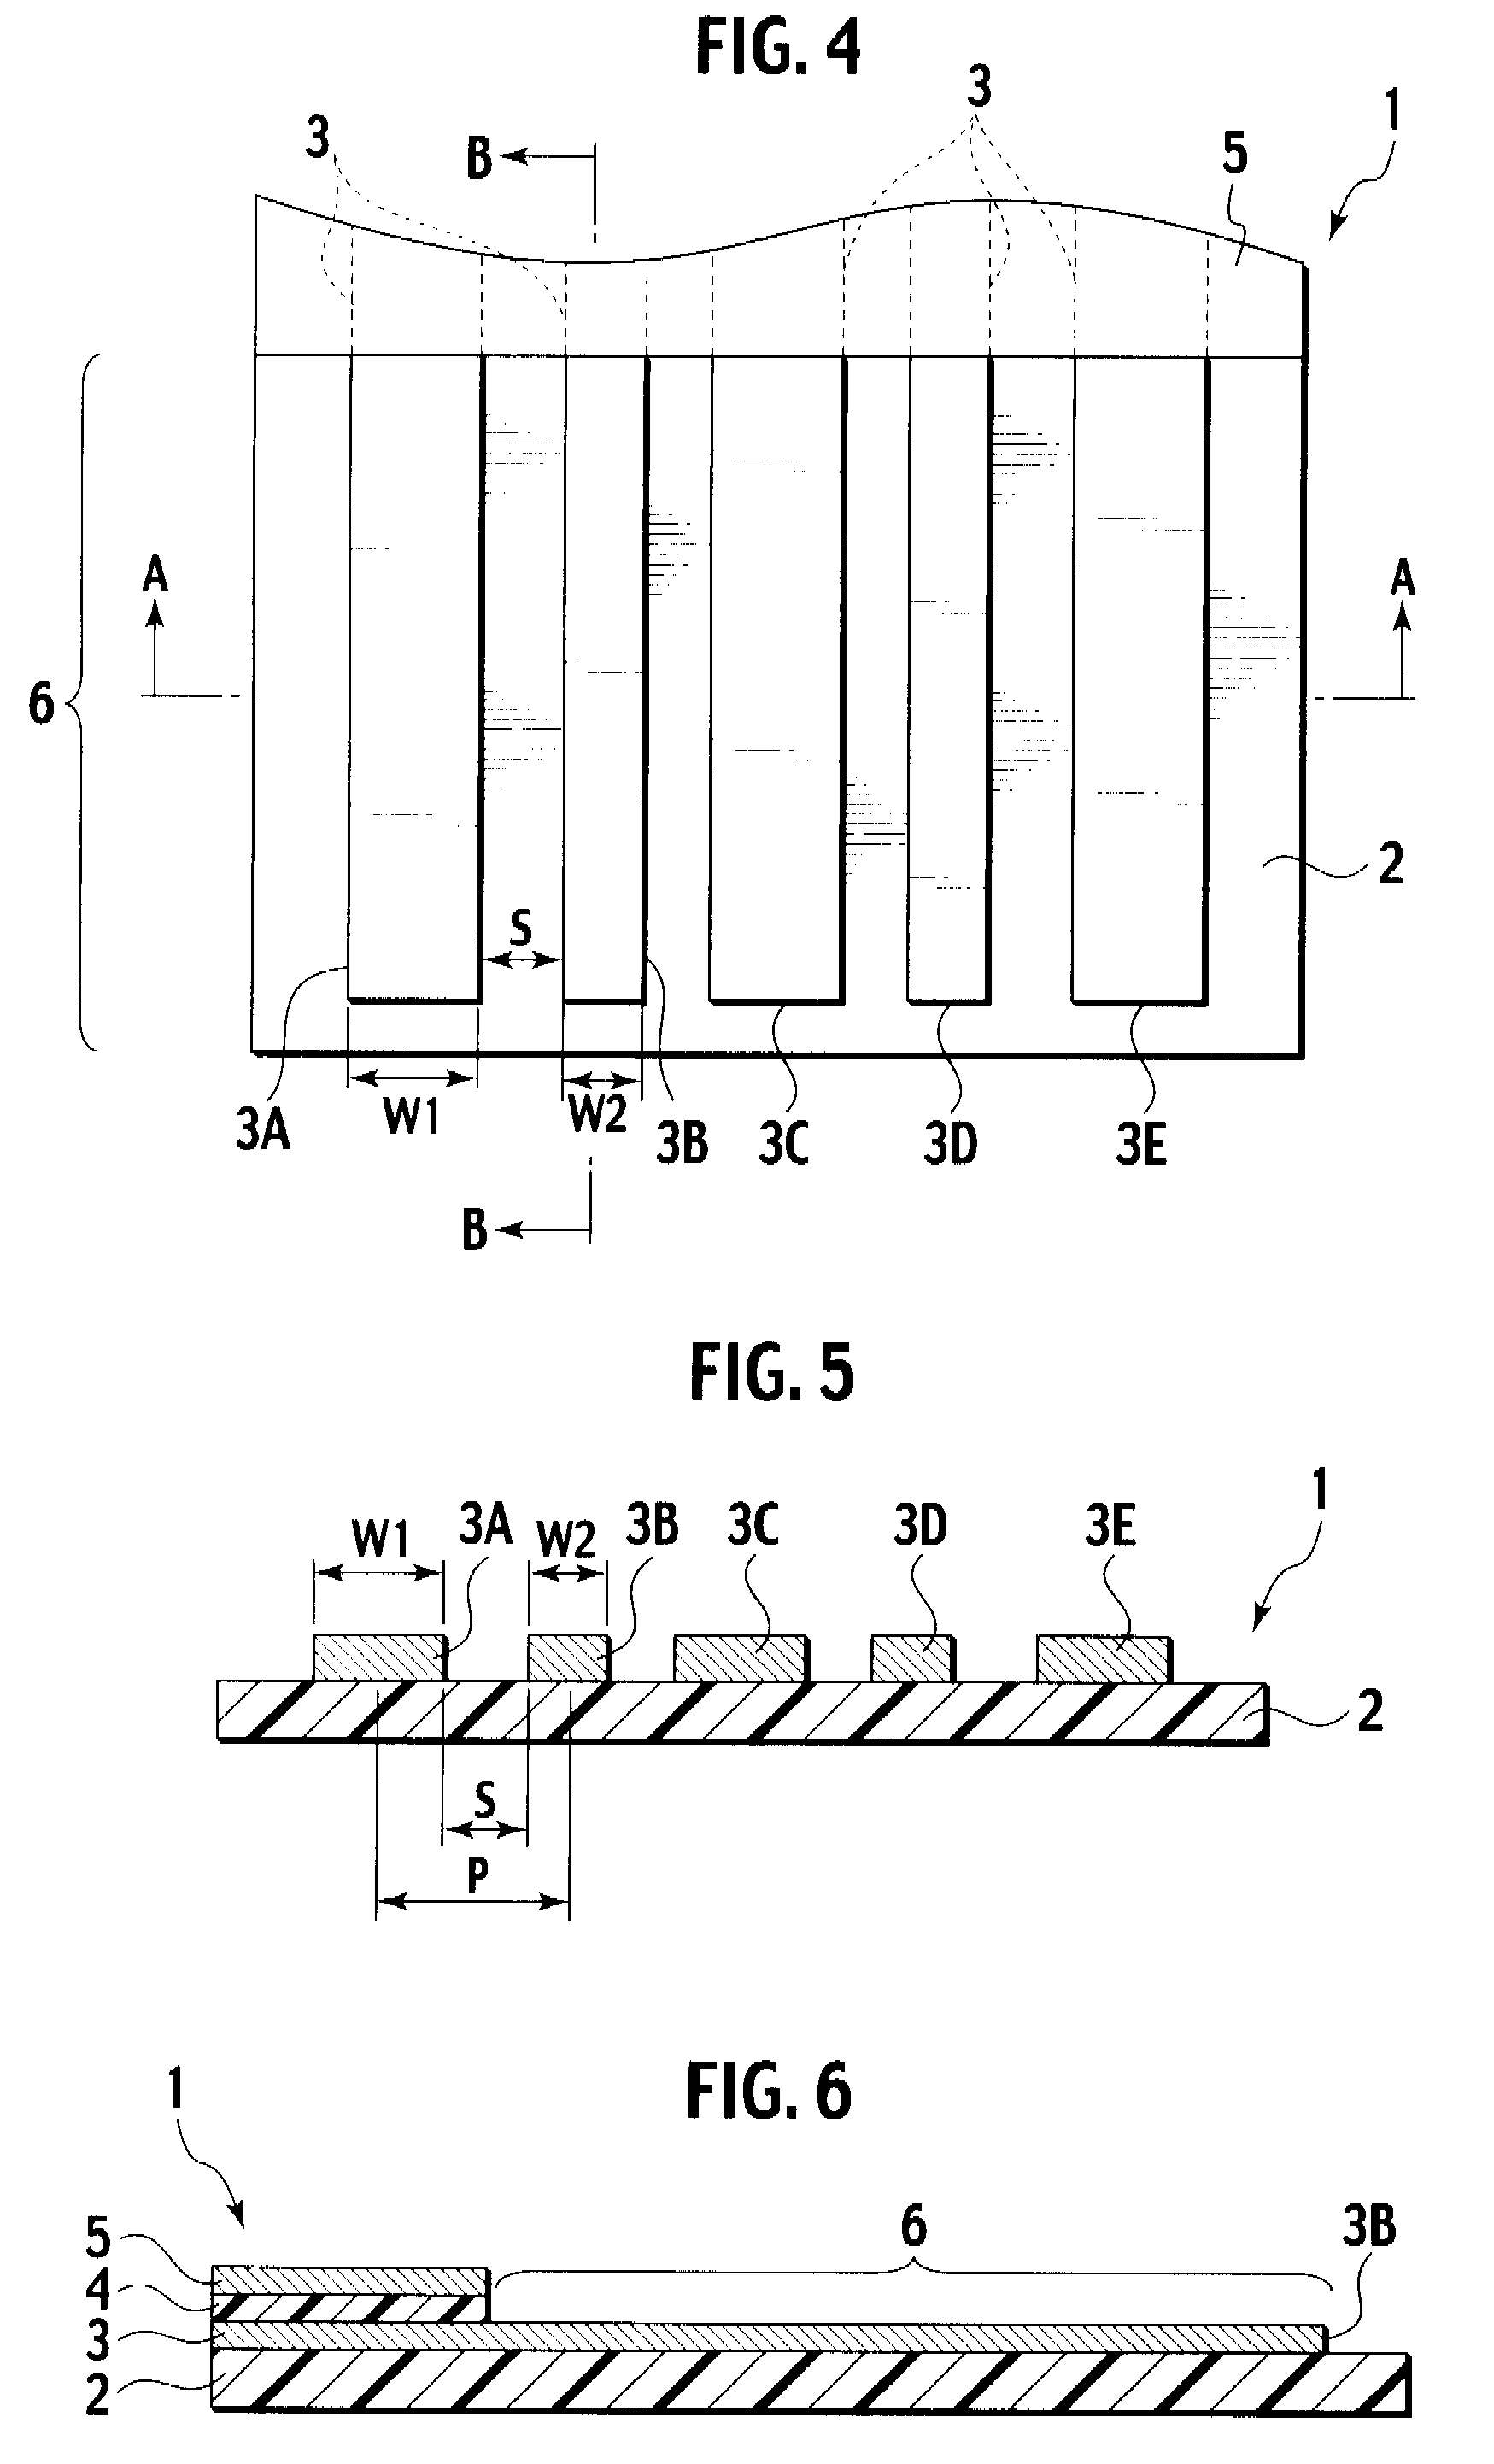 Printed wiring board and connection configuration of the same